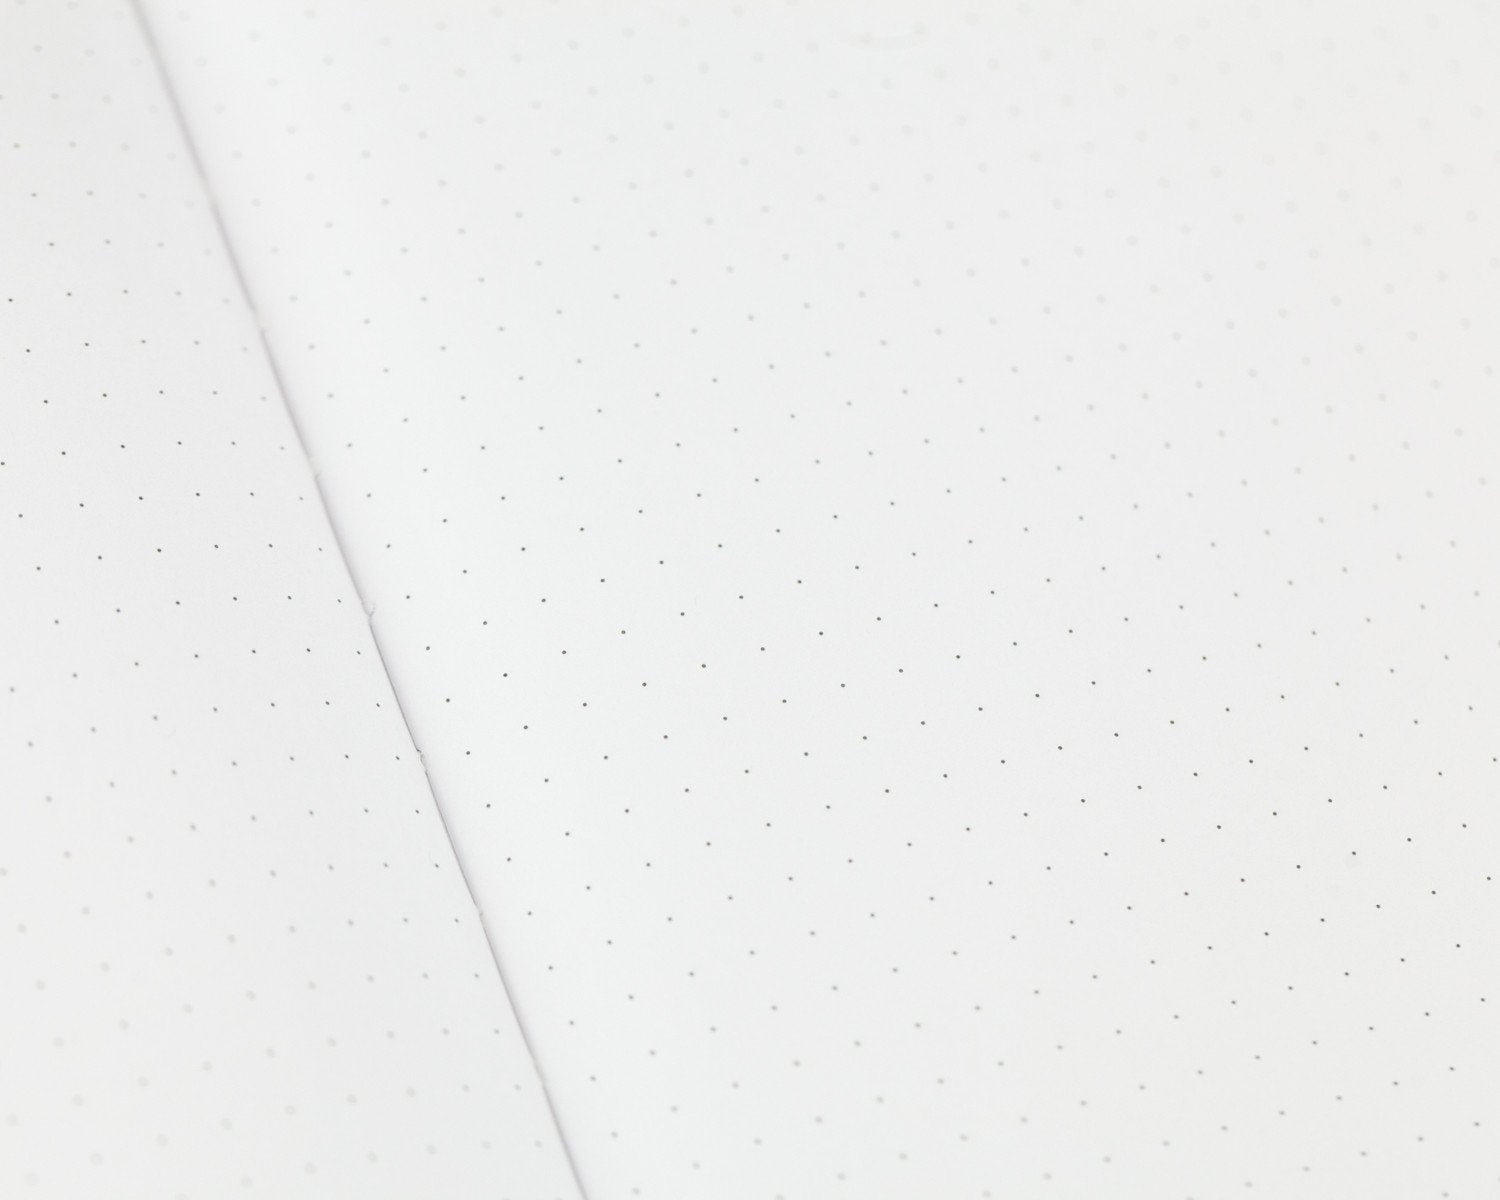 112 Dot Grid pages, 80gsm weight, recycled paper, mathematics softcover journal, Cognitive Surplus